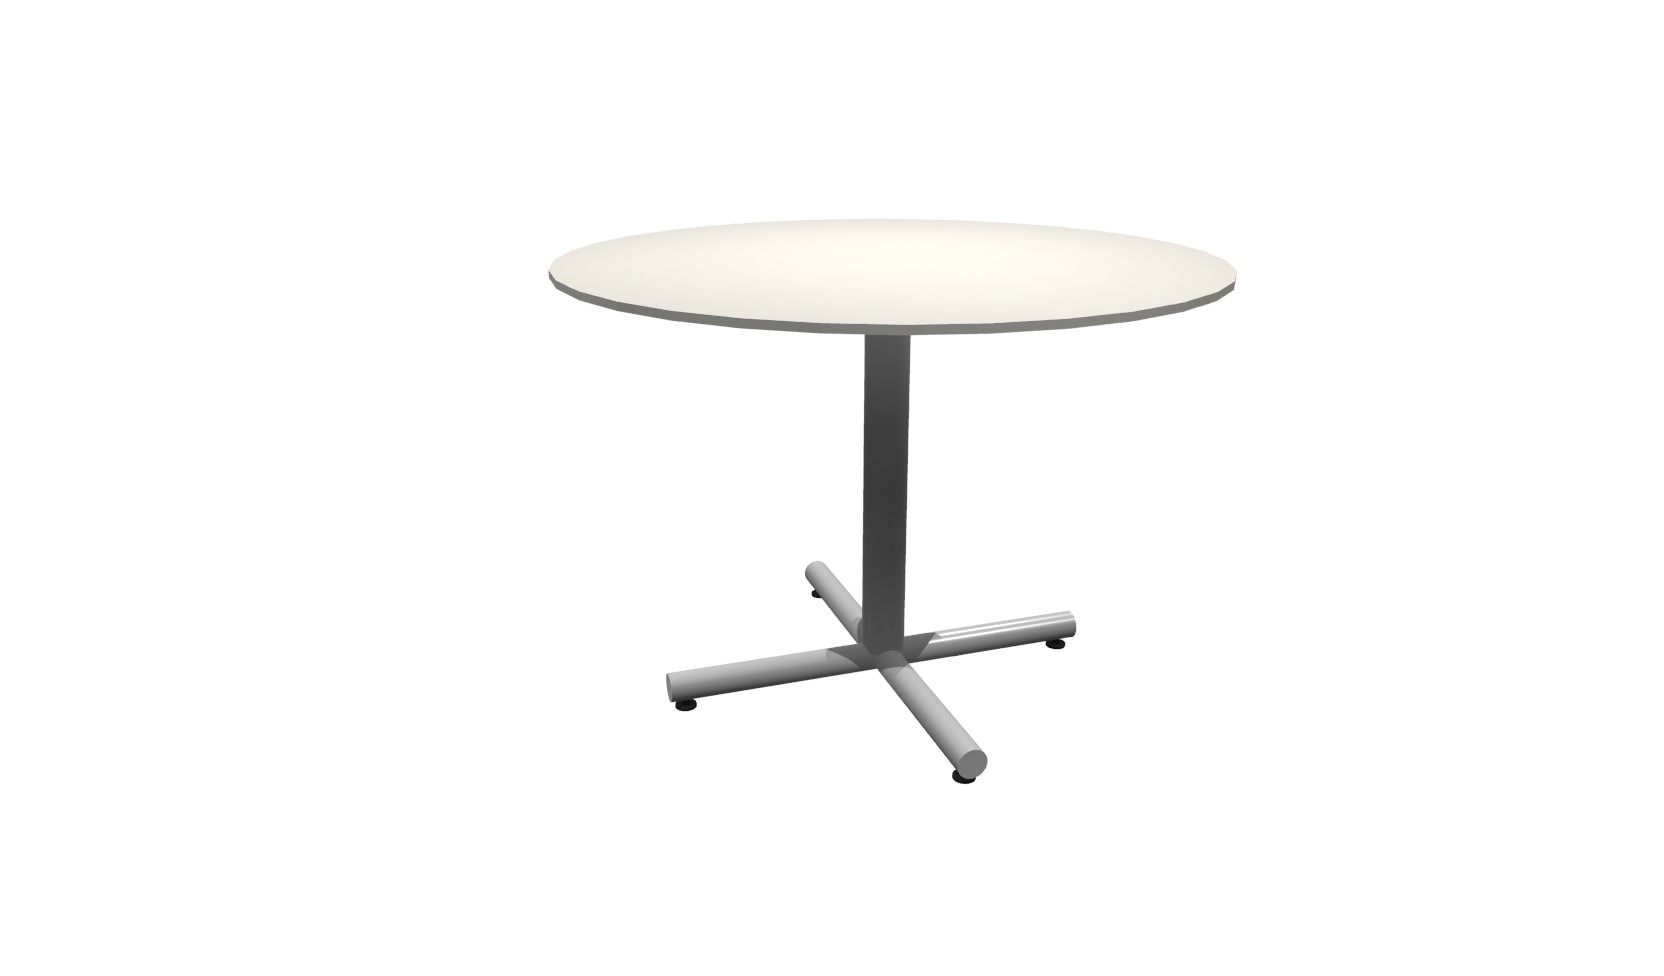 42 Inch Round Conference Table - (Gray / Silver)